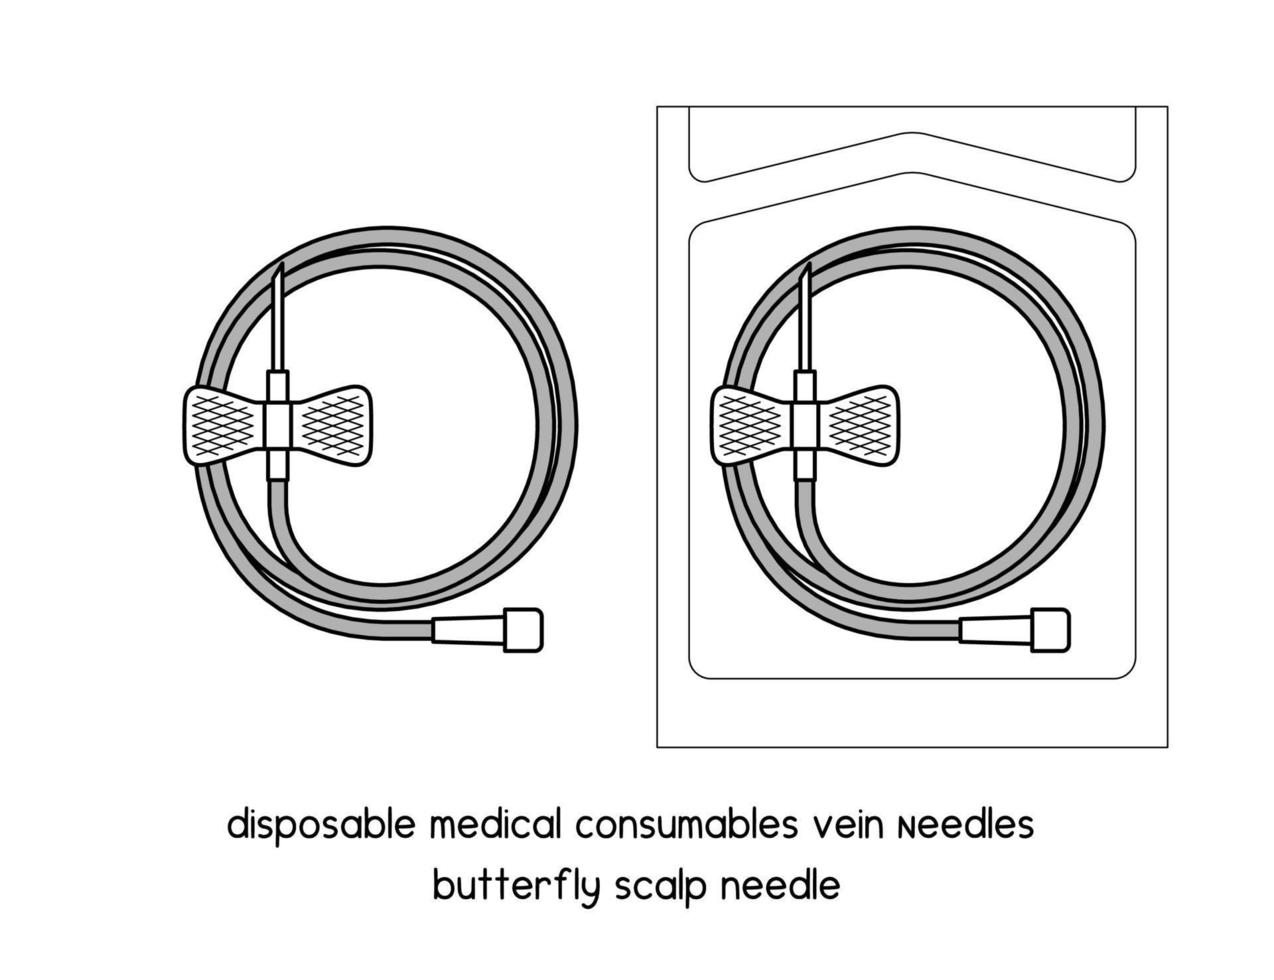 disposable medical Consumables  Vein Needles butterfly Scalp needle diagram for experiment setup lab outline vector illustration